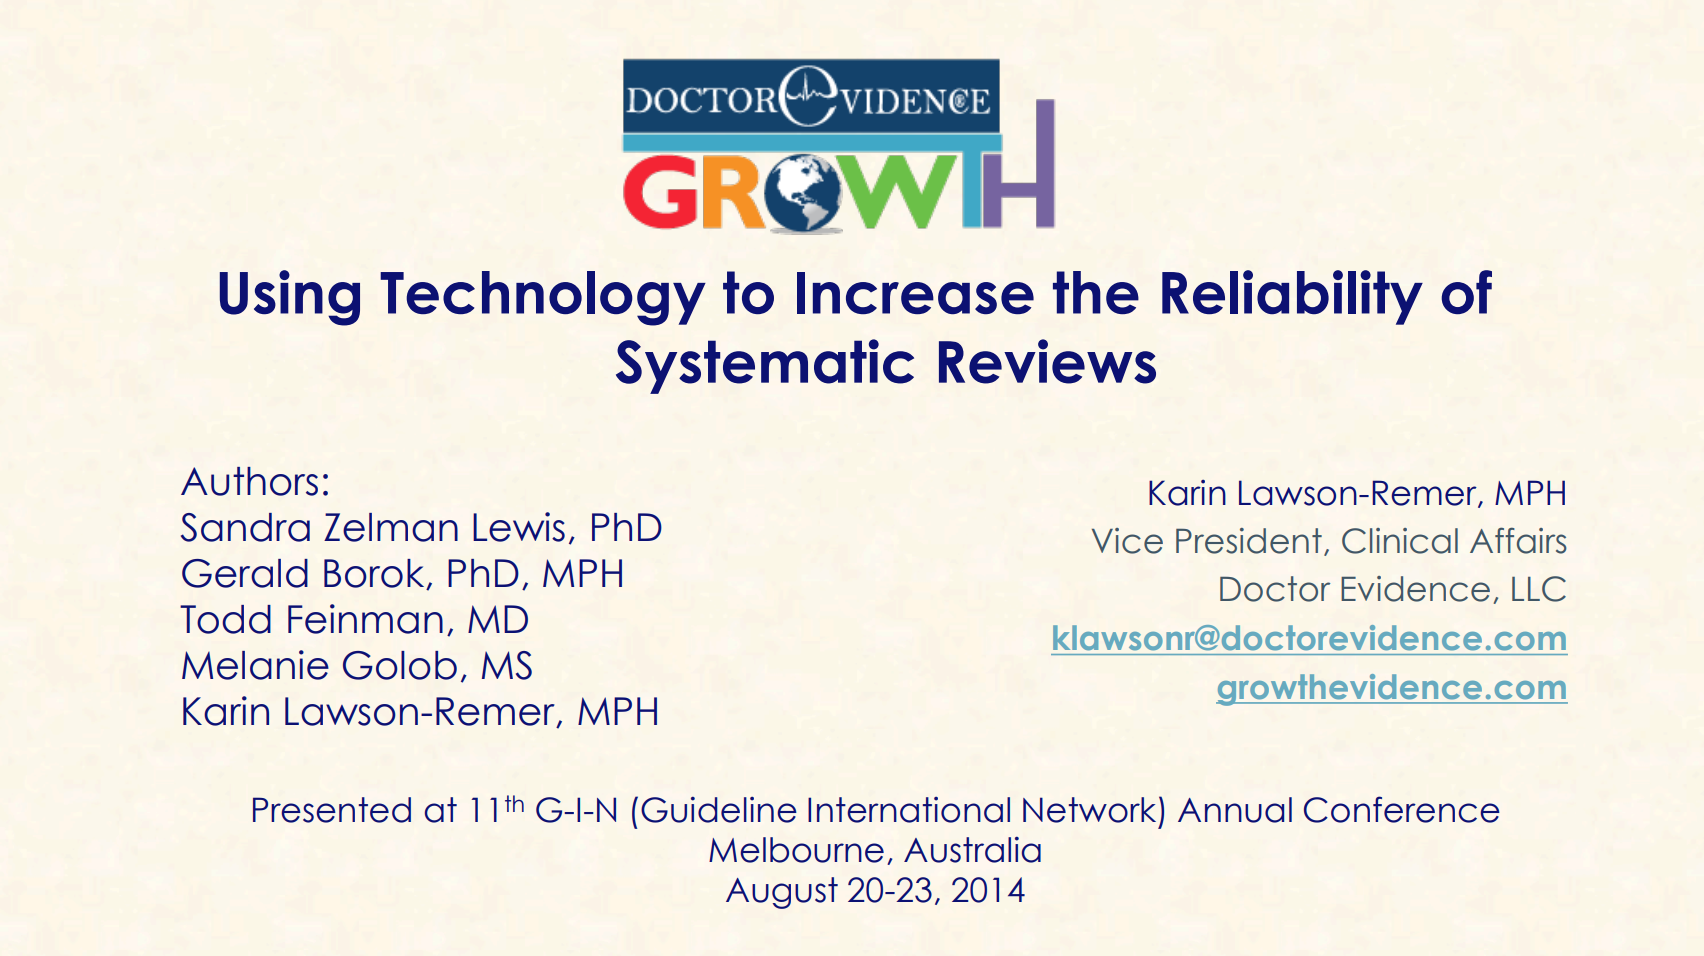 Using Technology to Increase the Reliability of Systematic Reviews